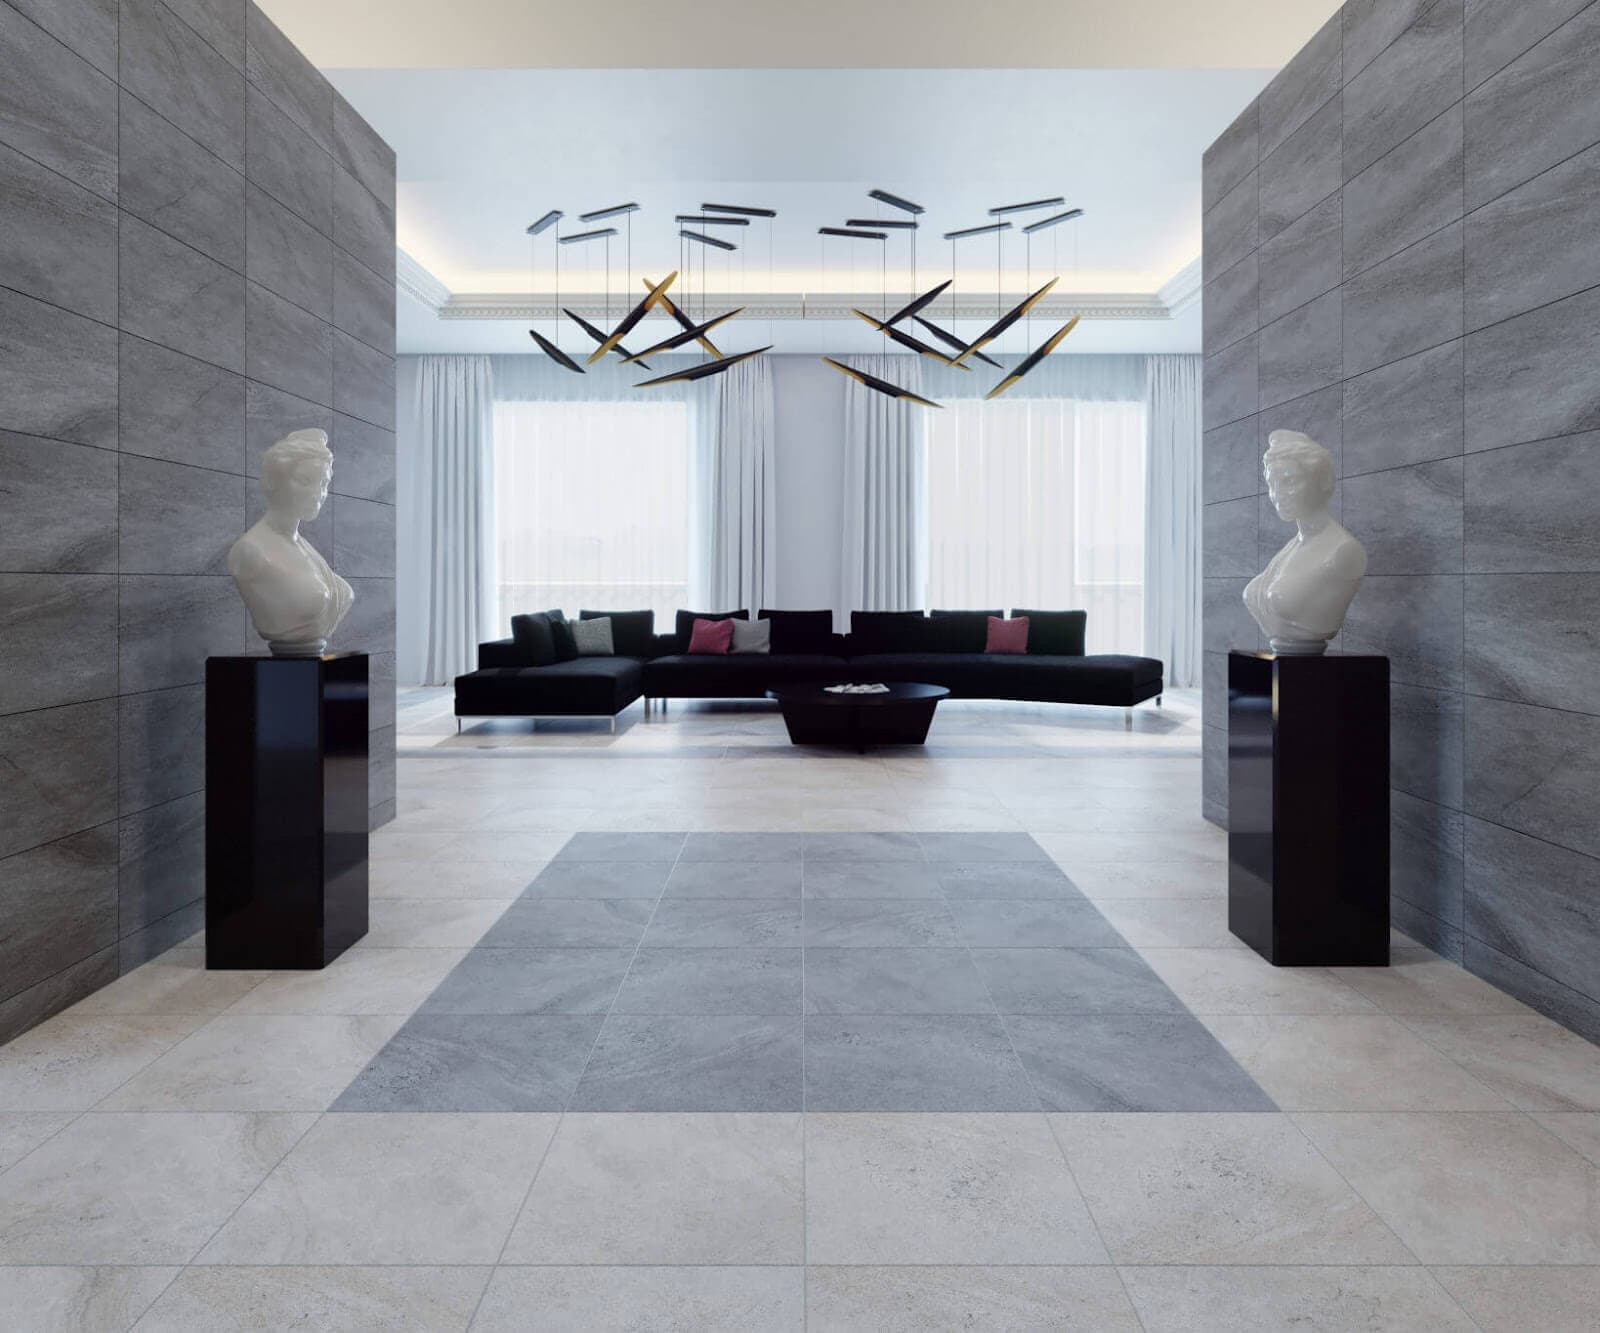 Large hotel space for guests with ceramic tile floor installation